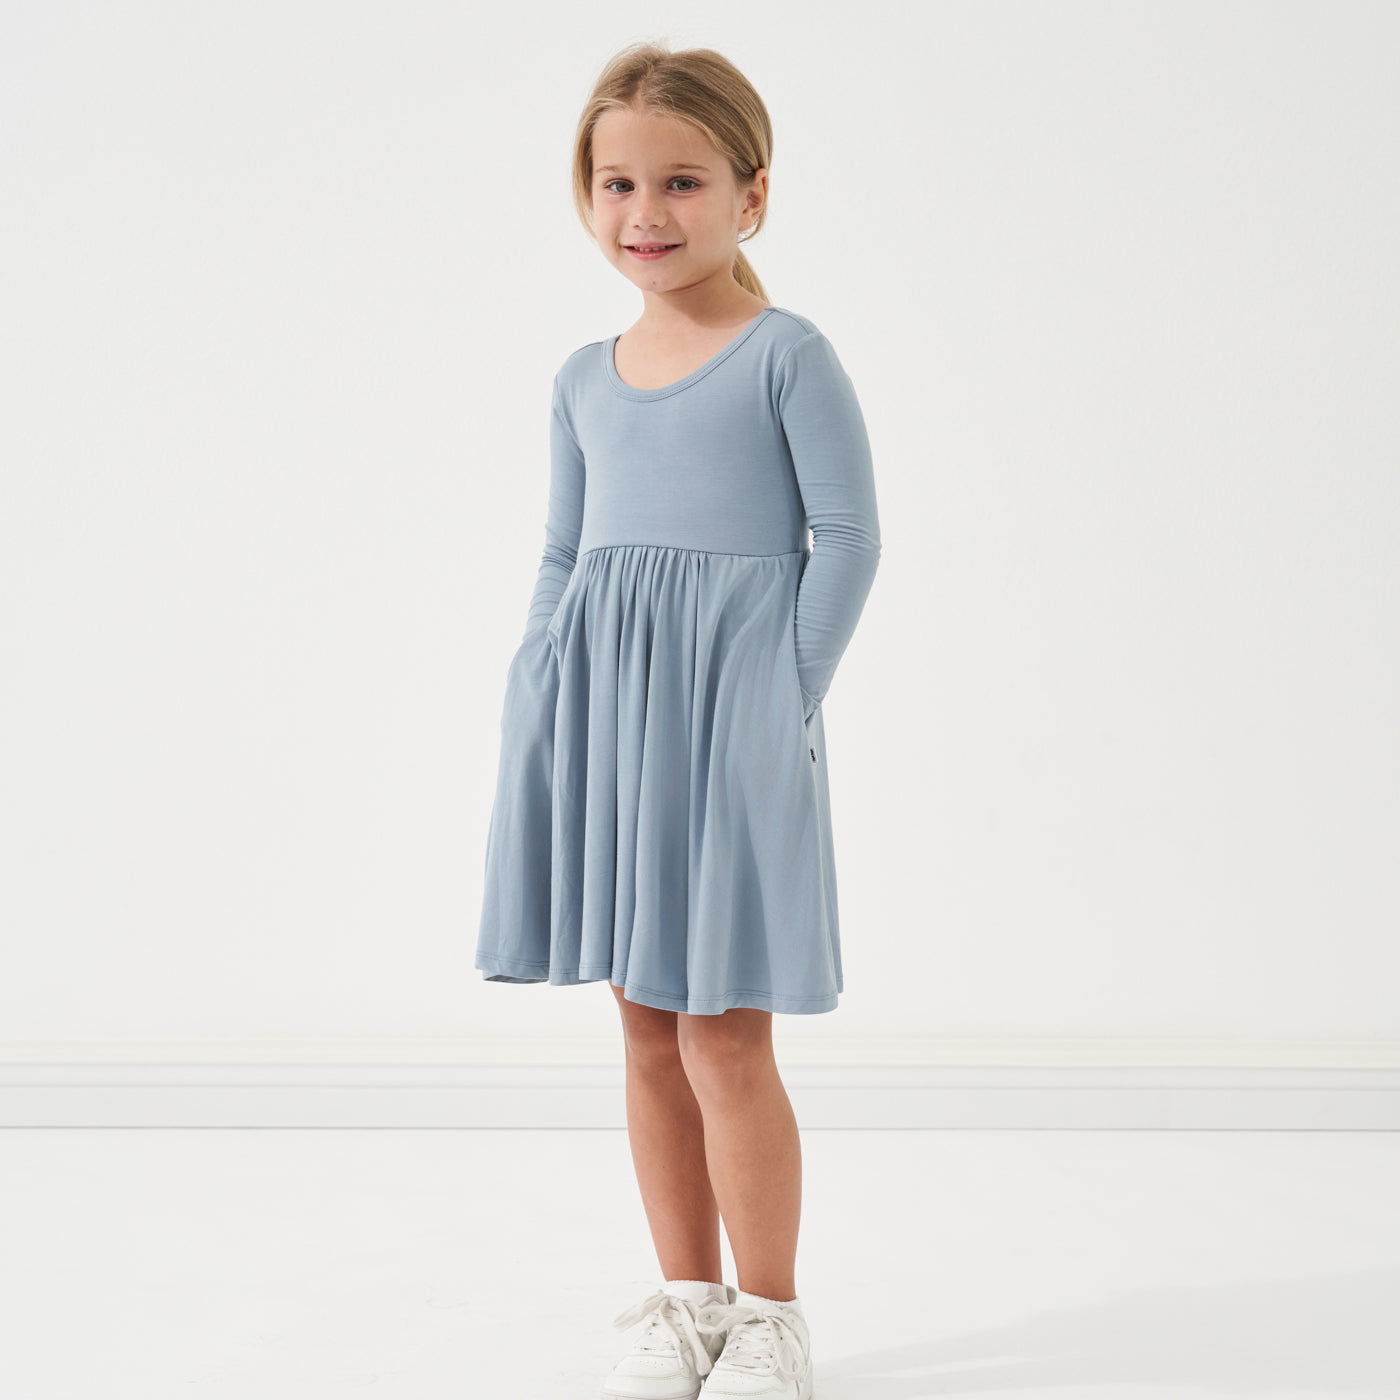 Child with her hands in her pockets wearing a Fog twirl dress